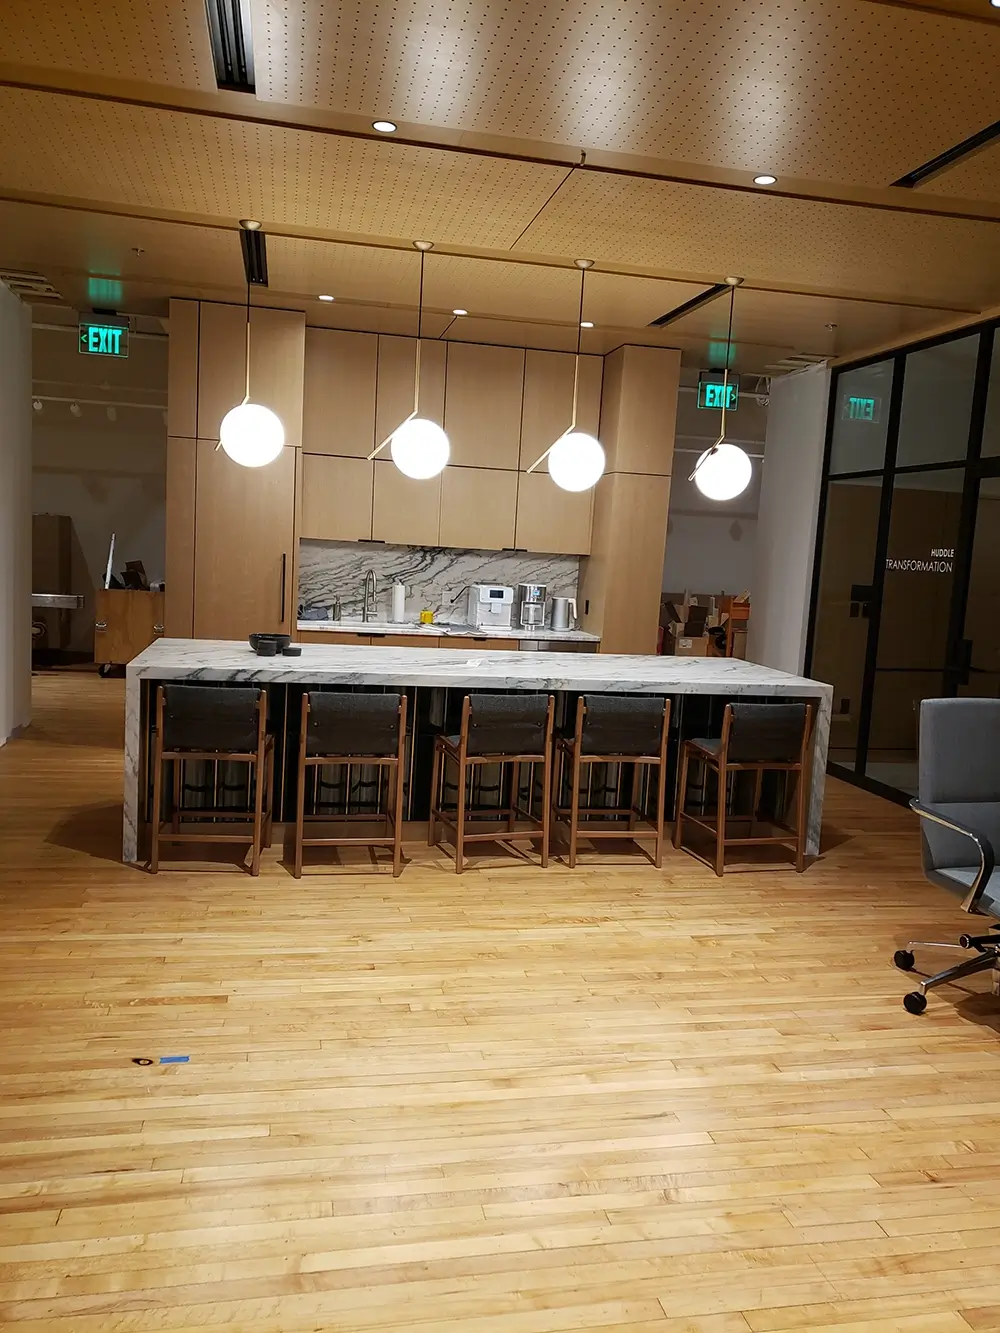 Newly remodeled commercial office, kitchen space with pendant lights and dining table